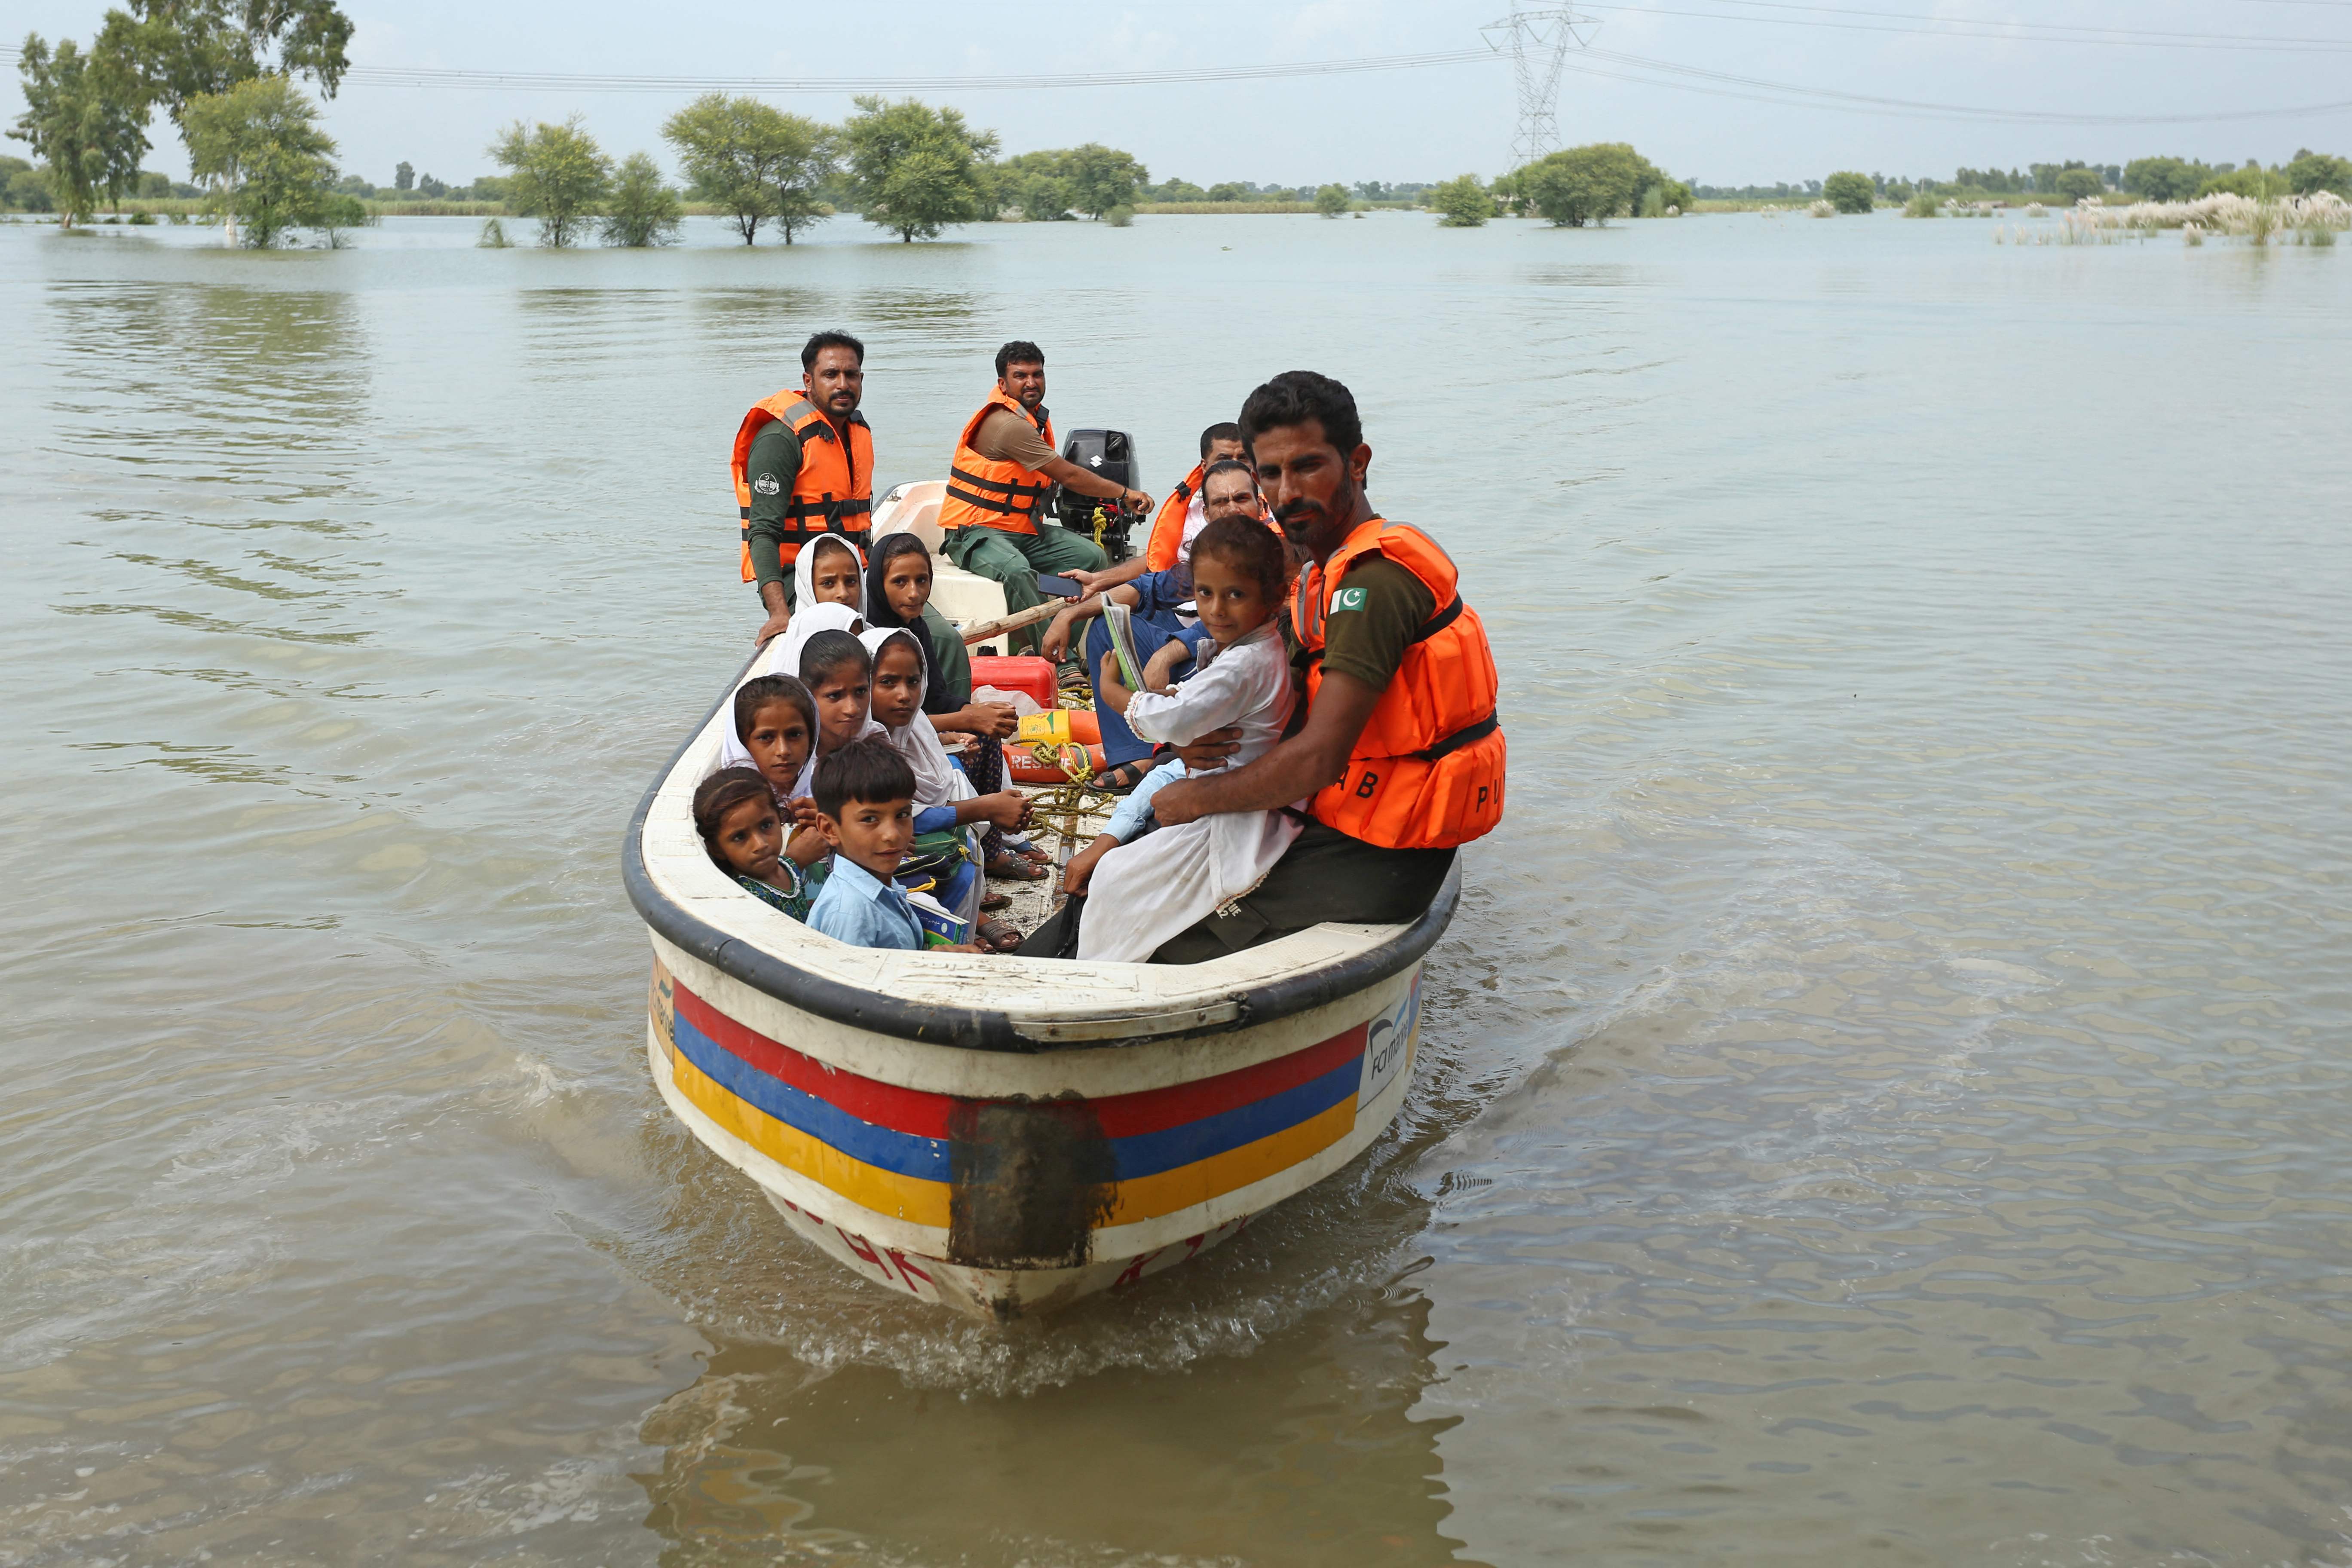 Rescue workers use a boat to drop children back home after school in a flood hit area following heavy monsoon rains in Dera Ghazi Khan